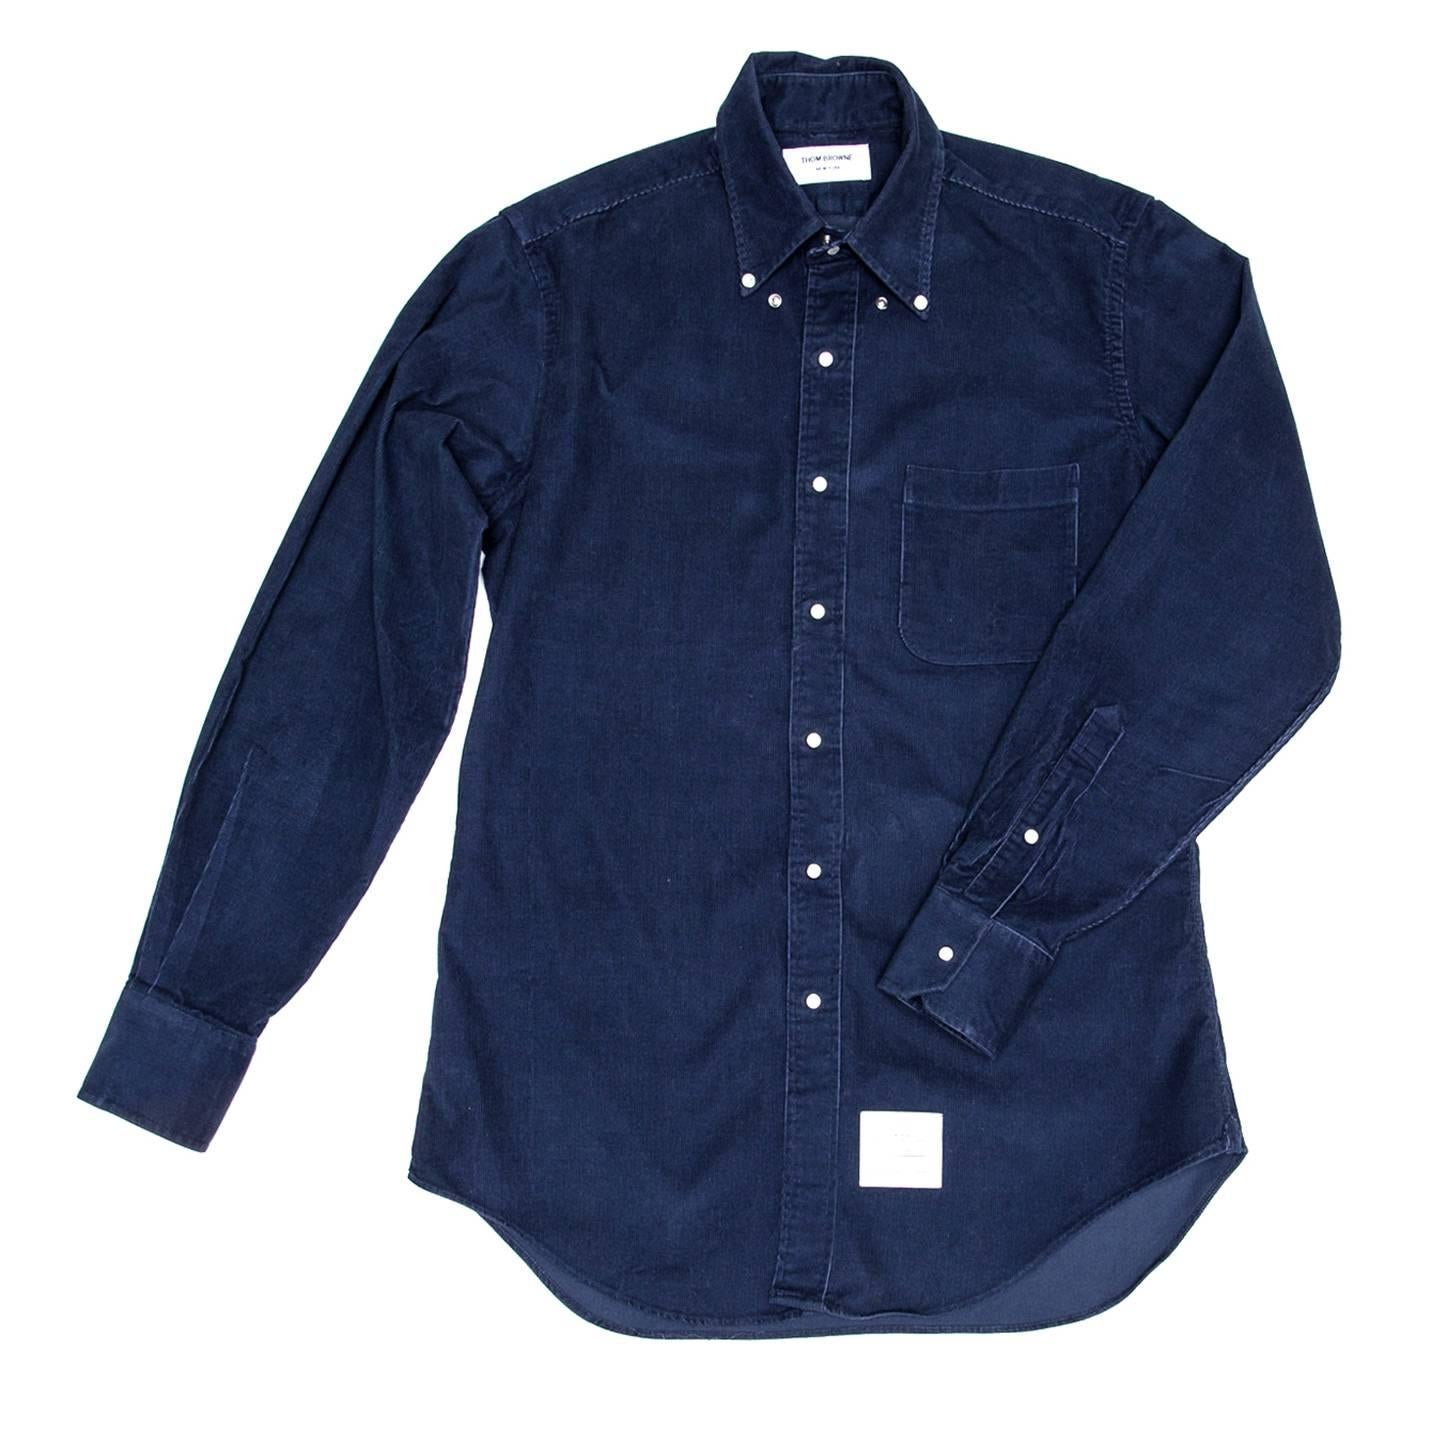 Thom Browne denim blue cotton corduroy shirt with button down collar, white mother-of-pearl snap buttons in a metal frame and a patch pocket at bust. Made for Man. Made in U.S.A.

Size  4

Condition  Excellent: never worn